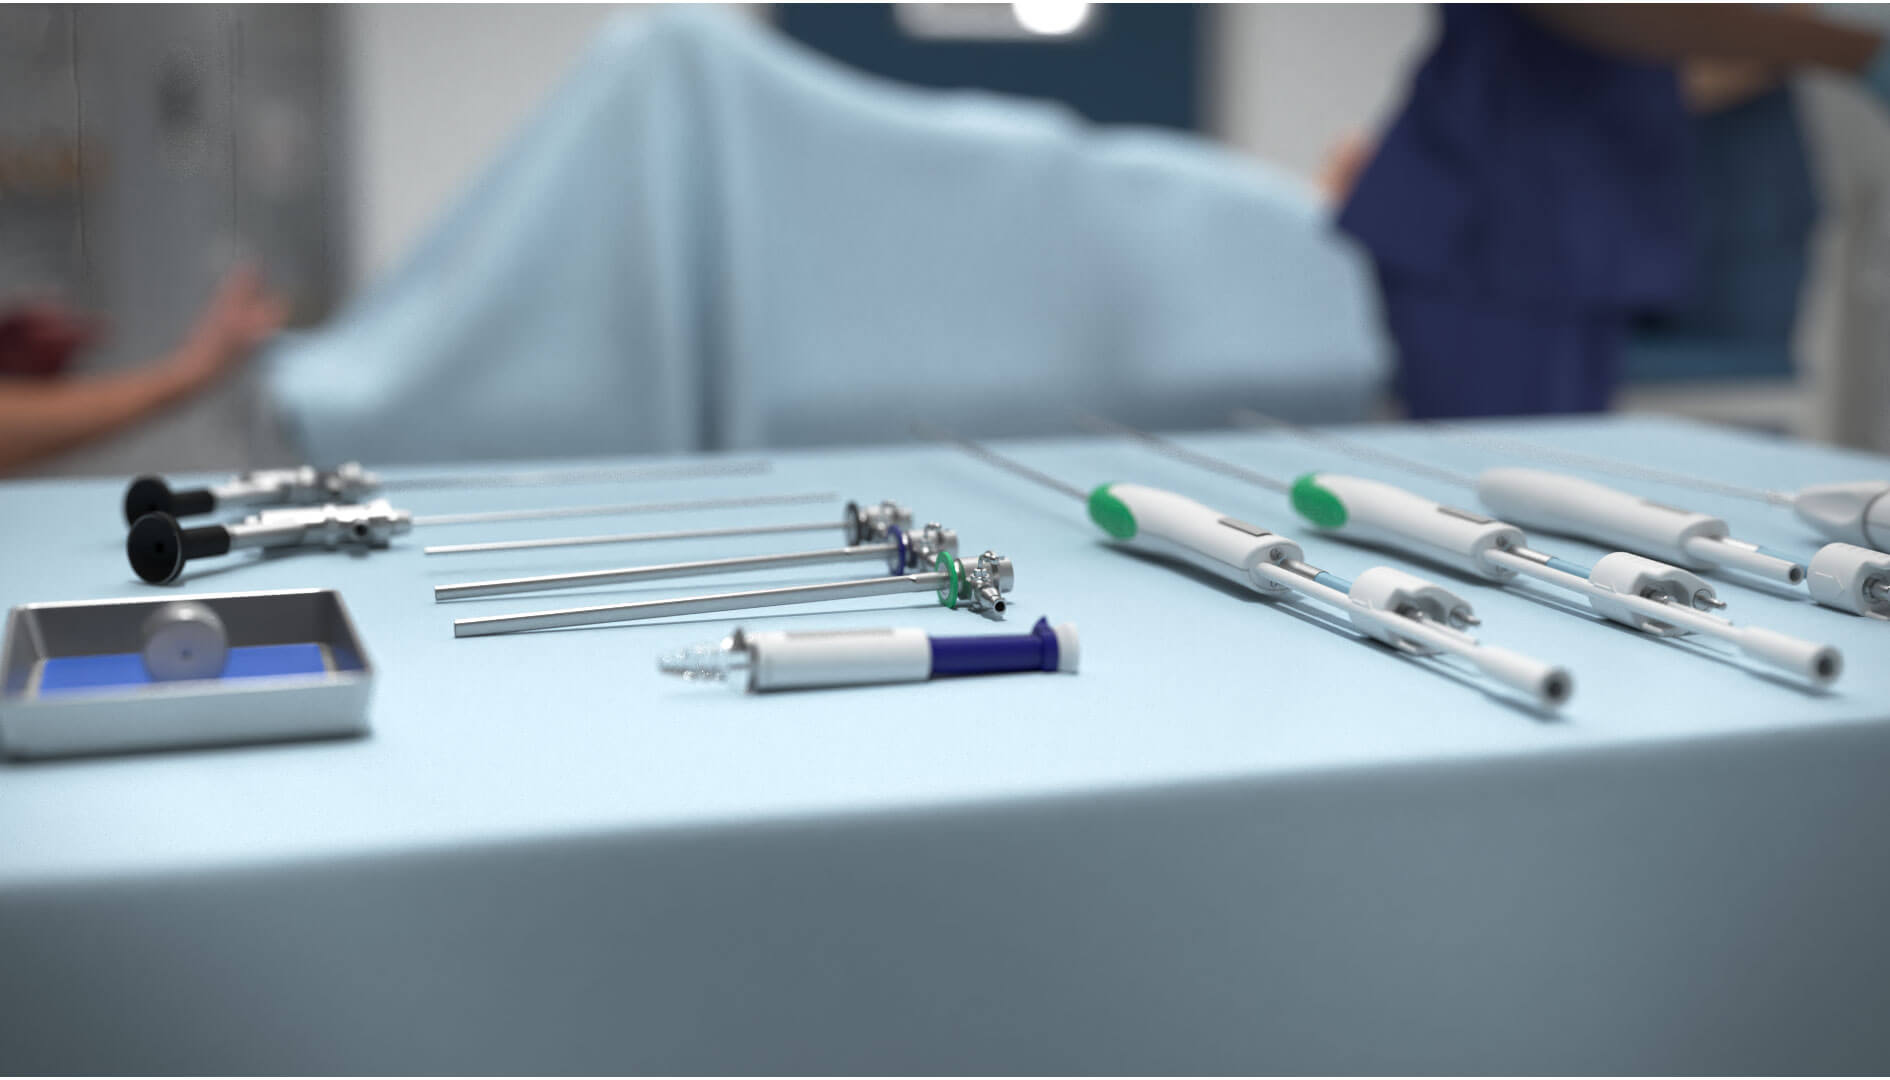 3D visual showing medical instruments on table